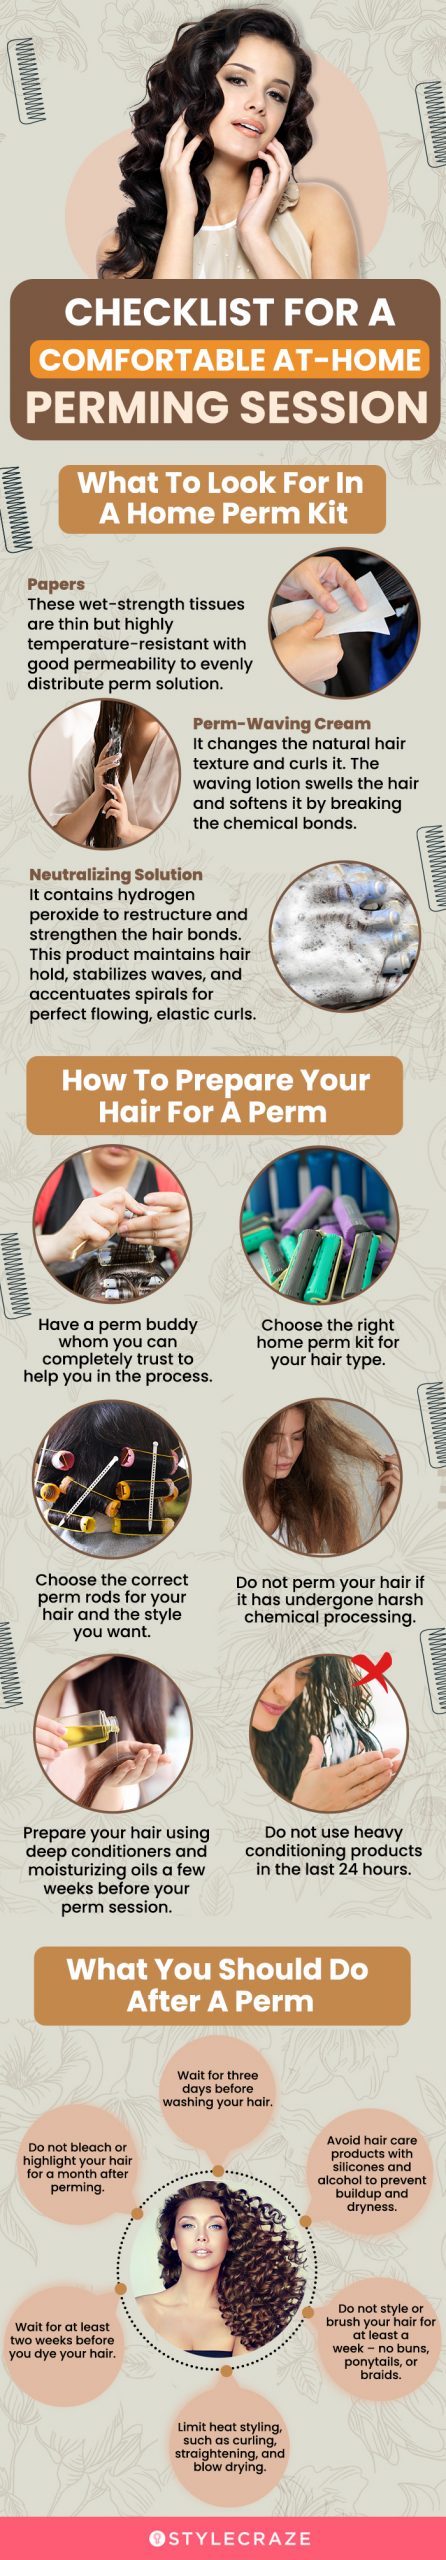 Checklist For A Comfortable At-Home Perming Session (infographic)